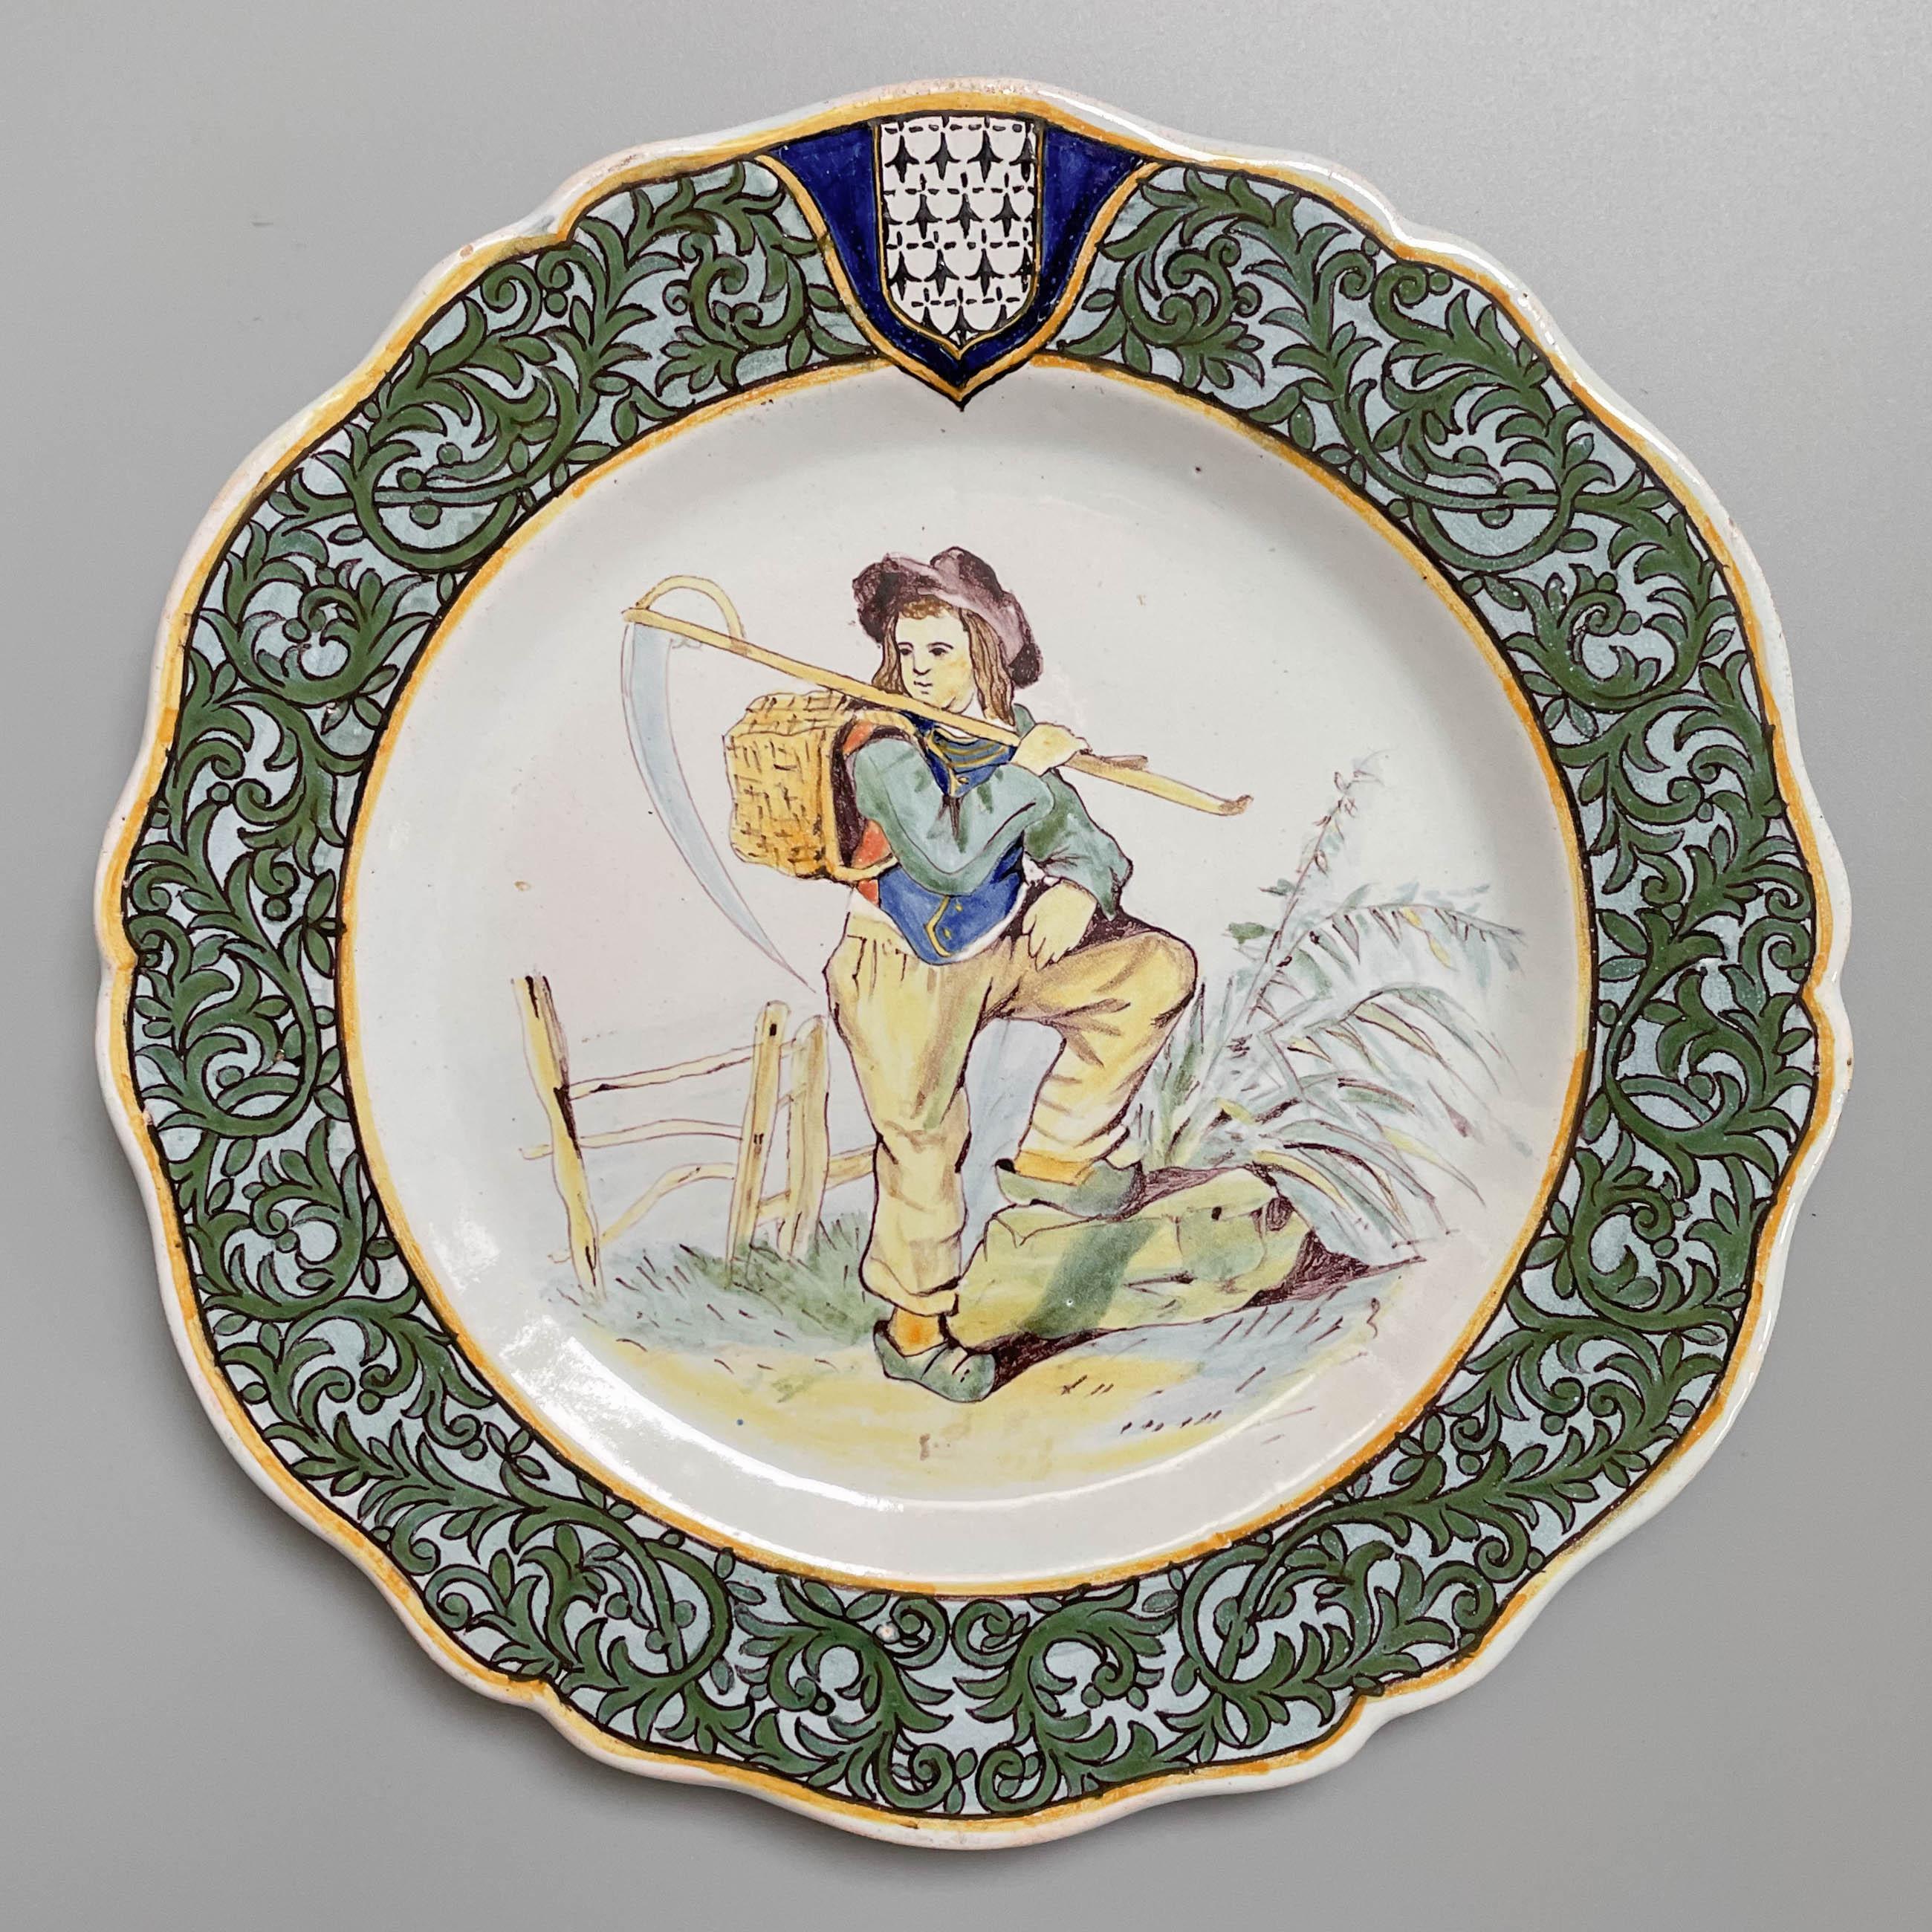 A 19th century French Porquier Beau Quimper faience plate with a young farmer holding a scythe. Foliate border with Brittany coat of arms. Good details. Minor chips to glaze on back. Mark verso: PB Fouesnant. Circa 1895-1900.
Dimensions:  9.25